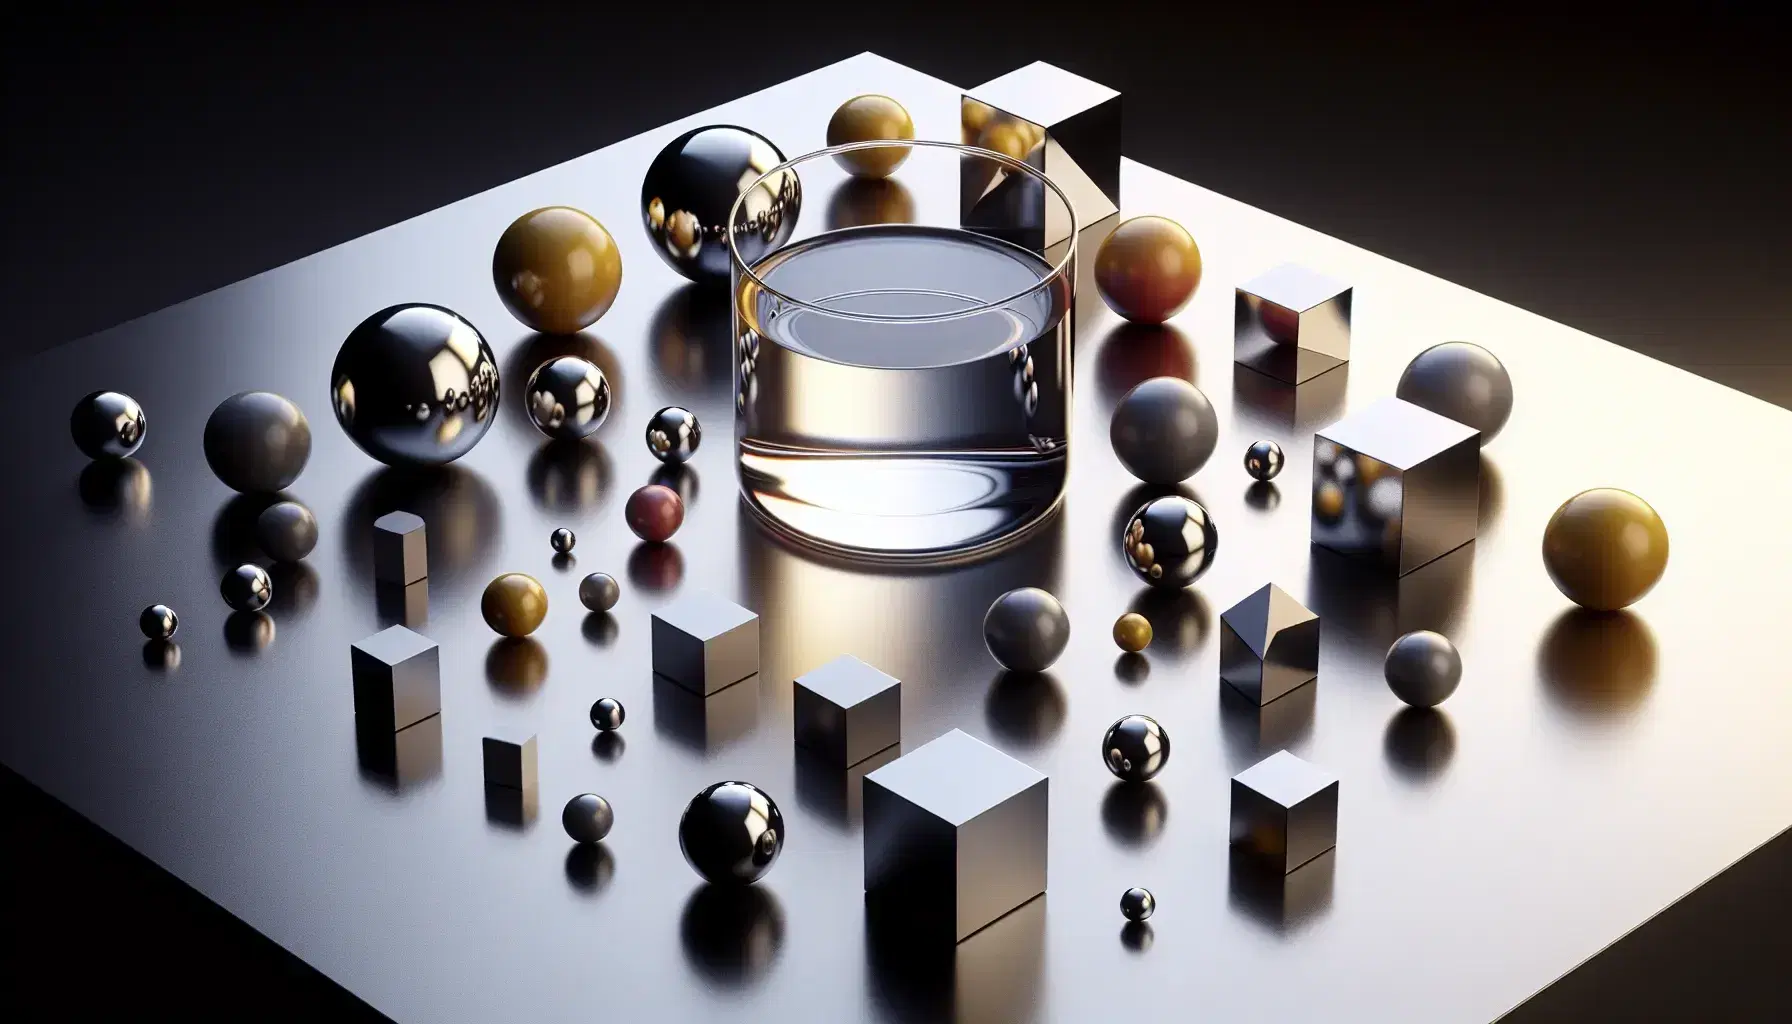 Polished metallic surface with an array of red, blue, yellow spheres, green, orange, purple cubes, white pyramids, and a beaker with clear liquid.